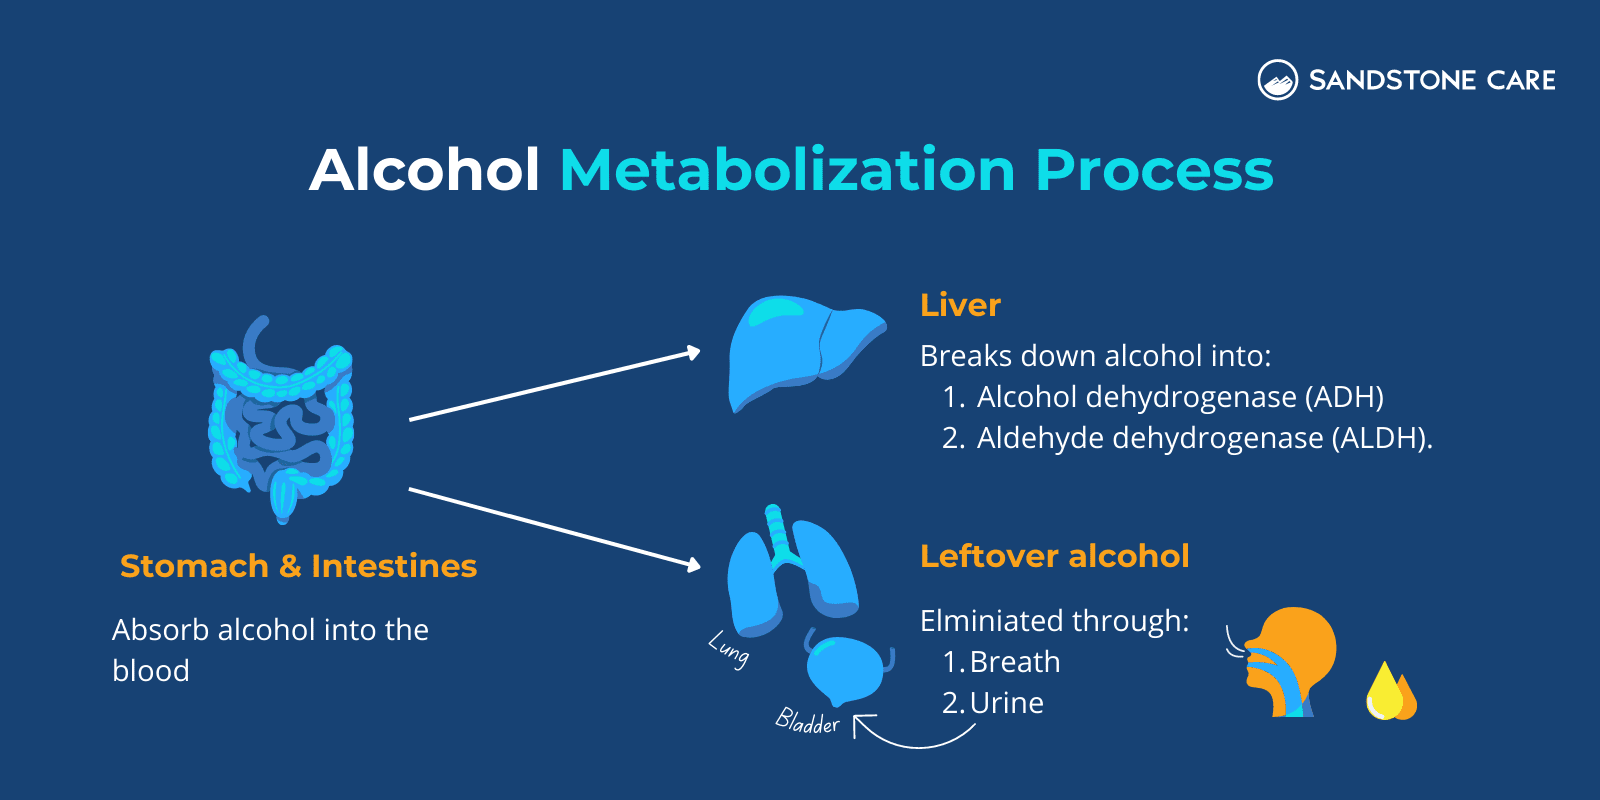 Alcohol metabolization process illustrated with different illustrations of organs